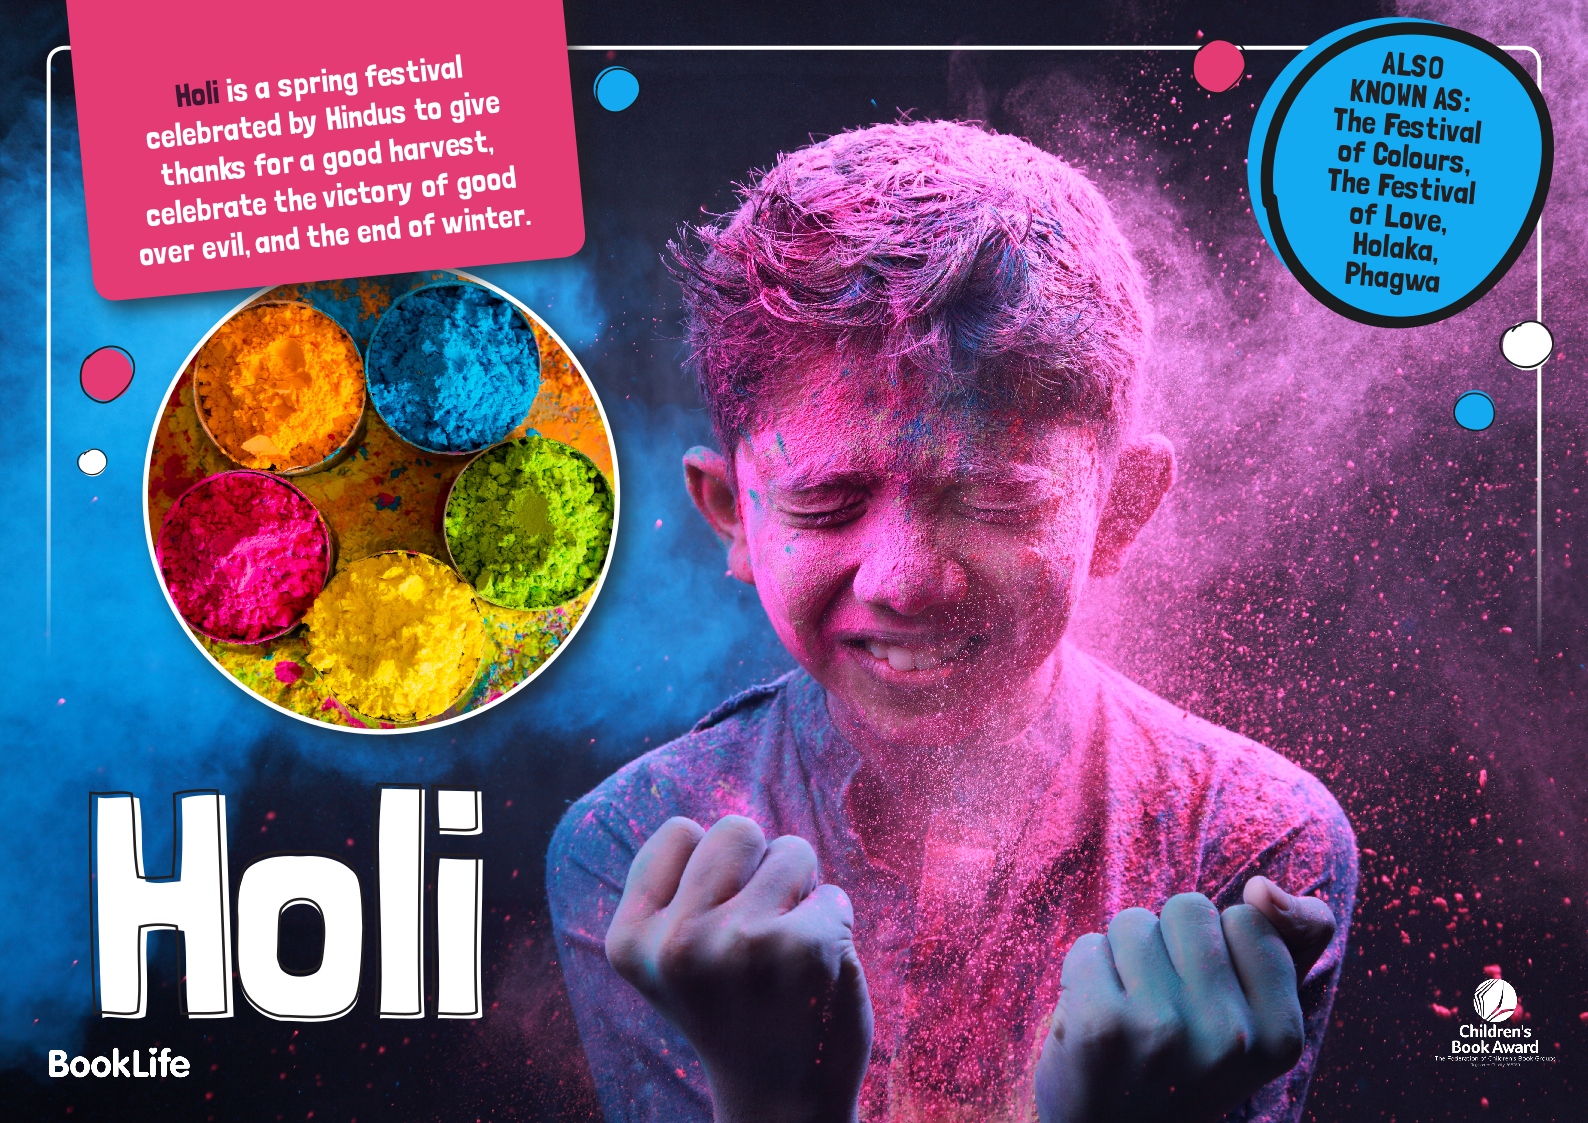 Holi Poster by BookLife